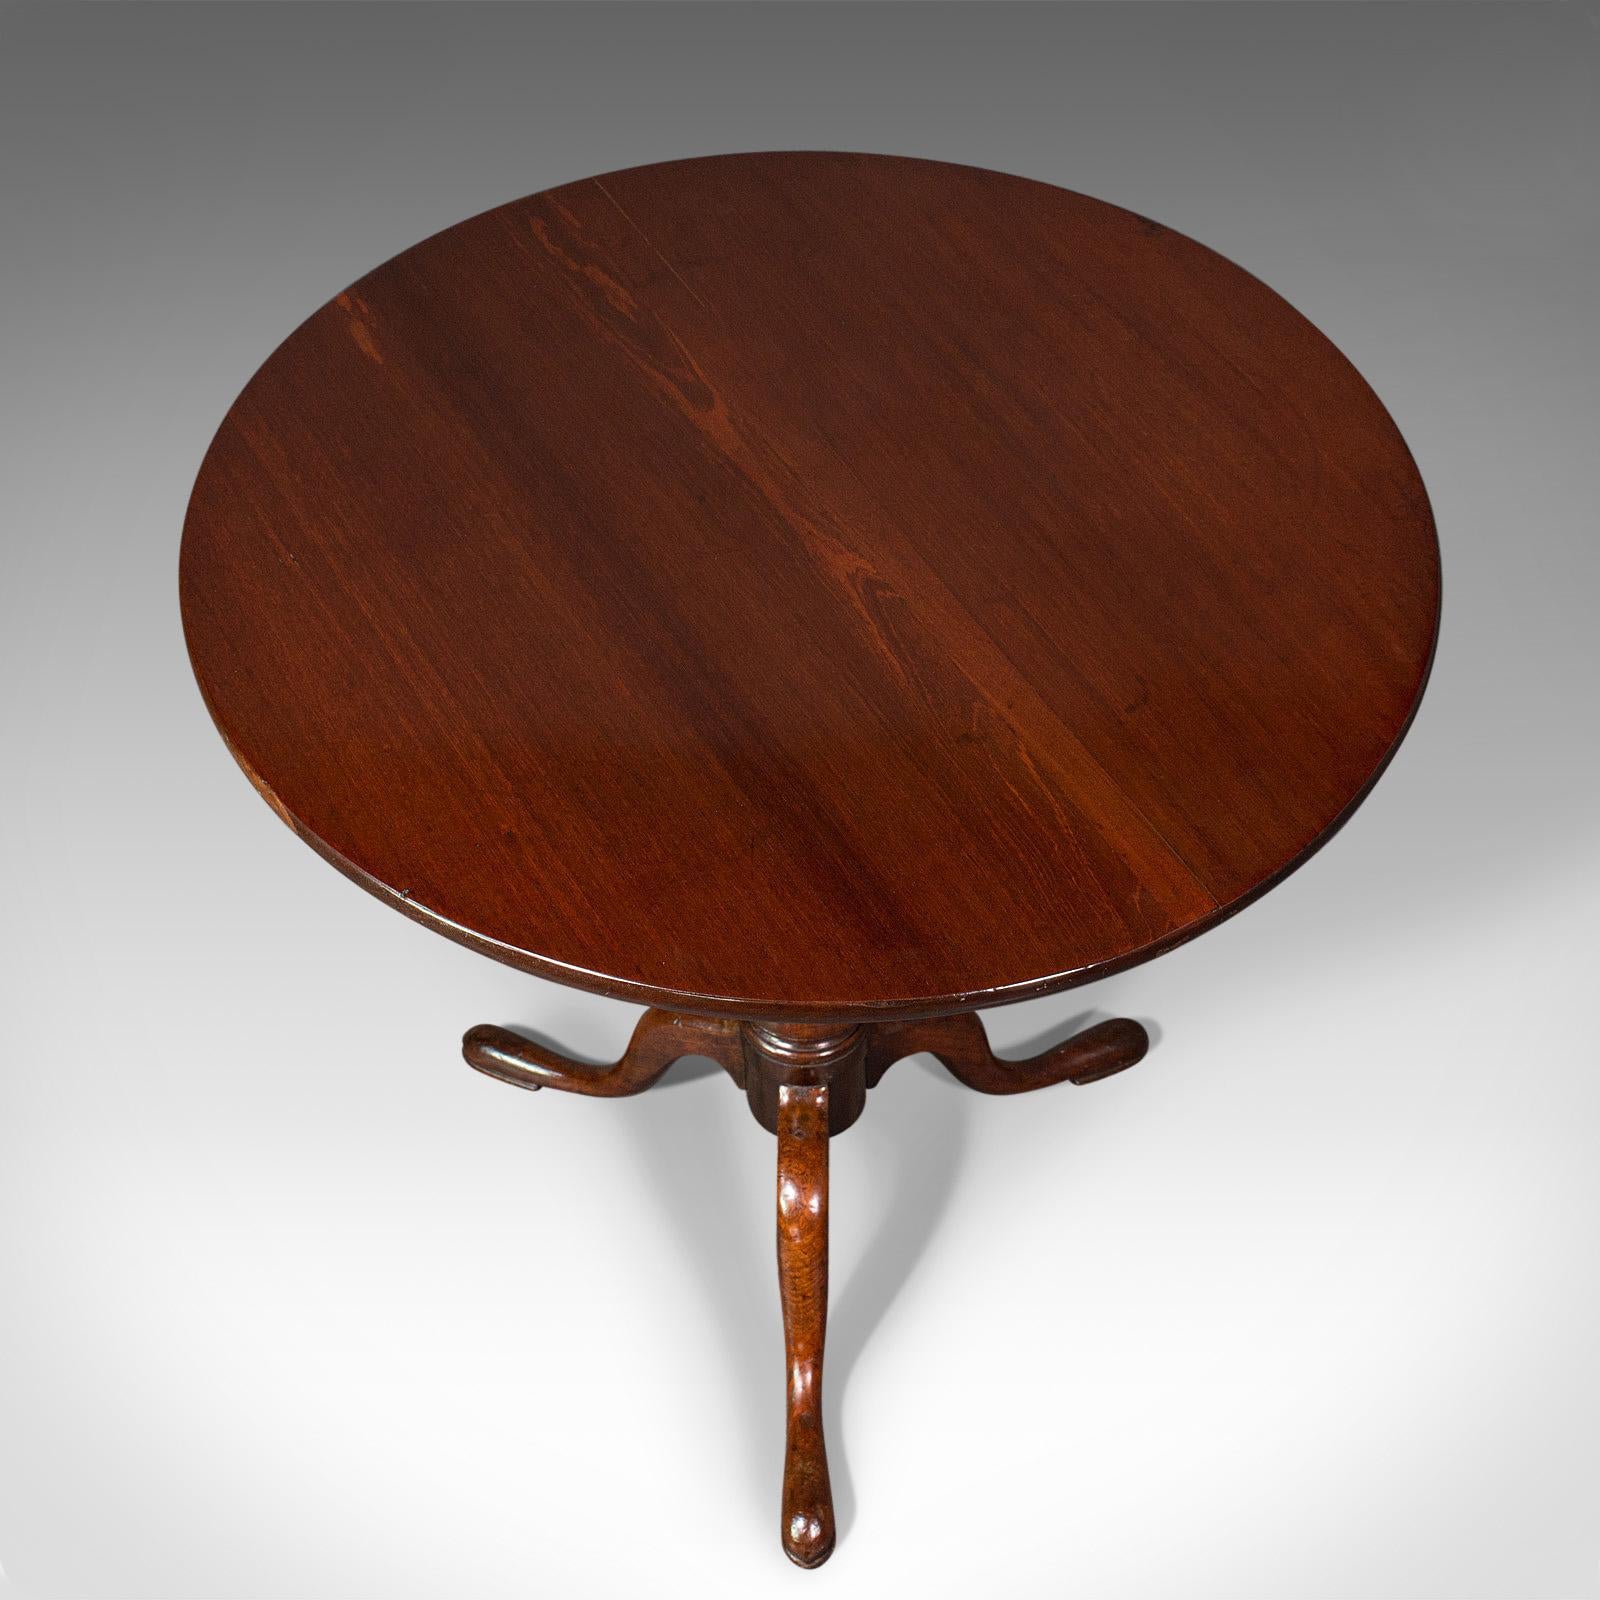 Antique Tilt Top Table, English, Mahogany, Occasional, Wine, Georgian, C.1780 For Sale 3